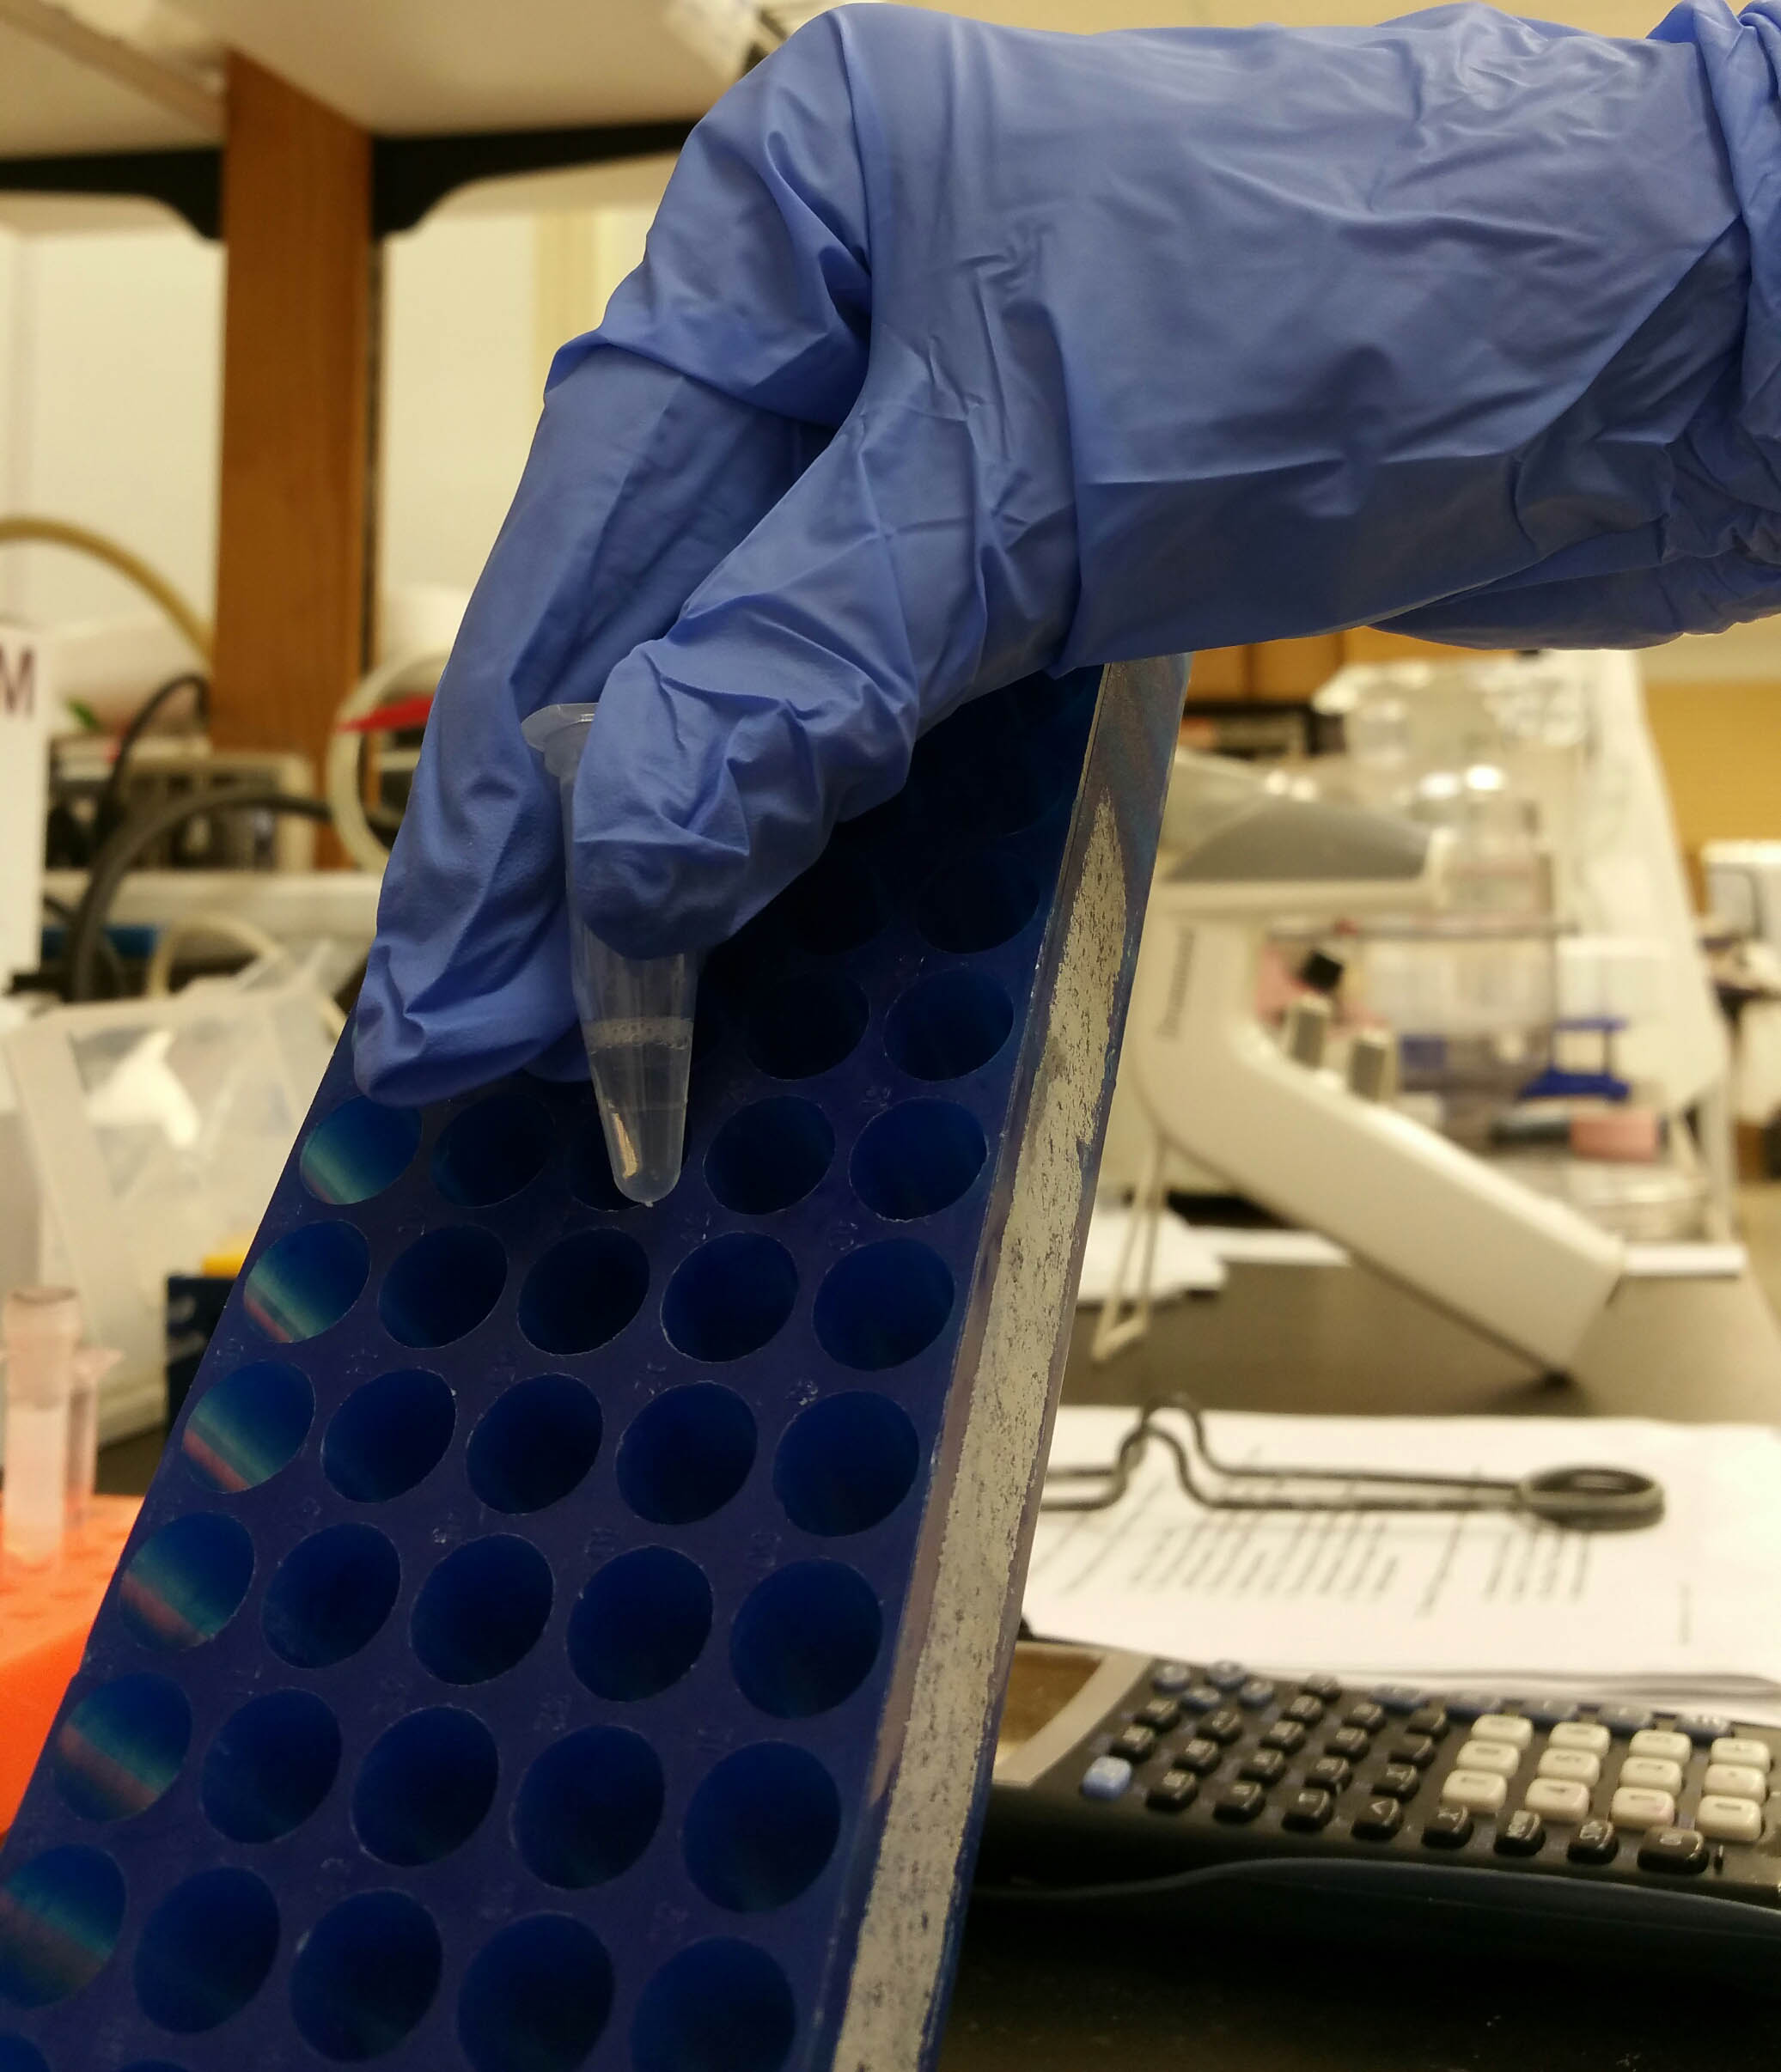 25 Real Lab Hacks from Researchers Like You - When vortexing your tubes aren't working, use your tube rack as a washboard